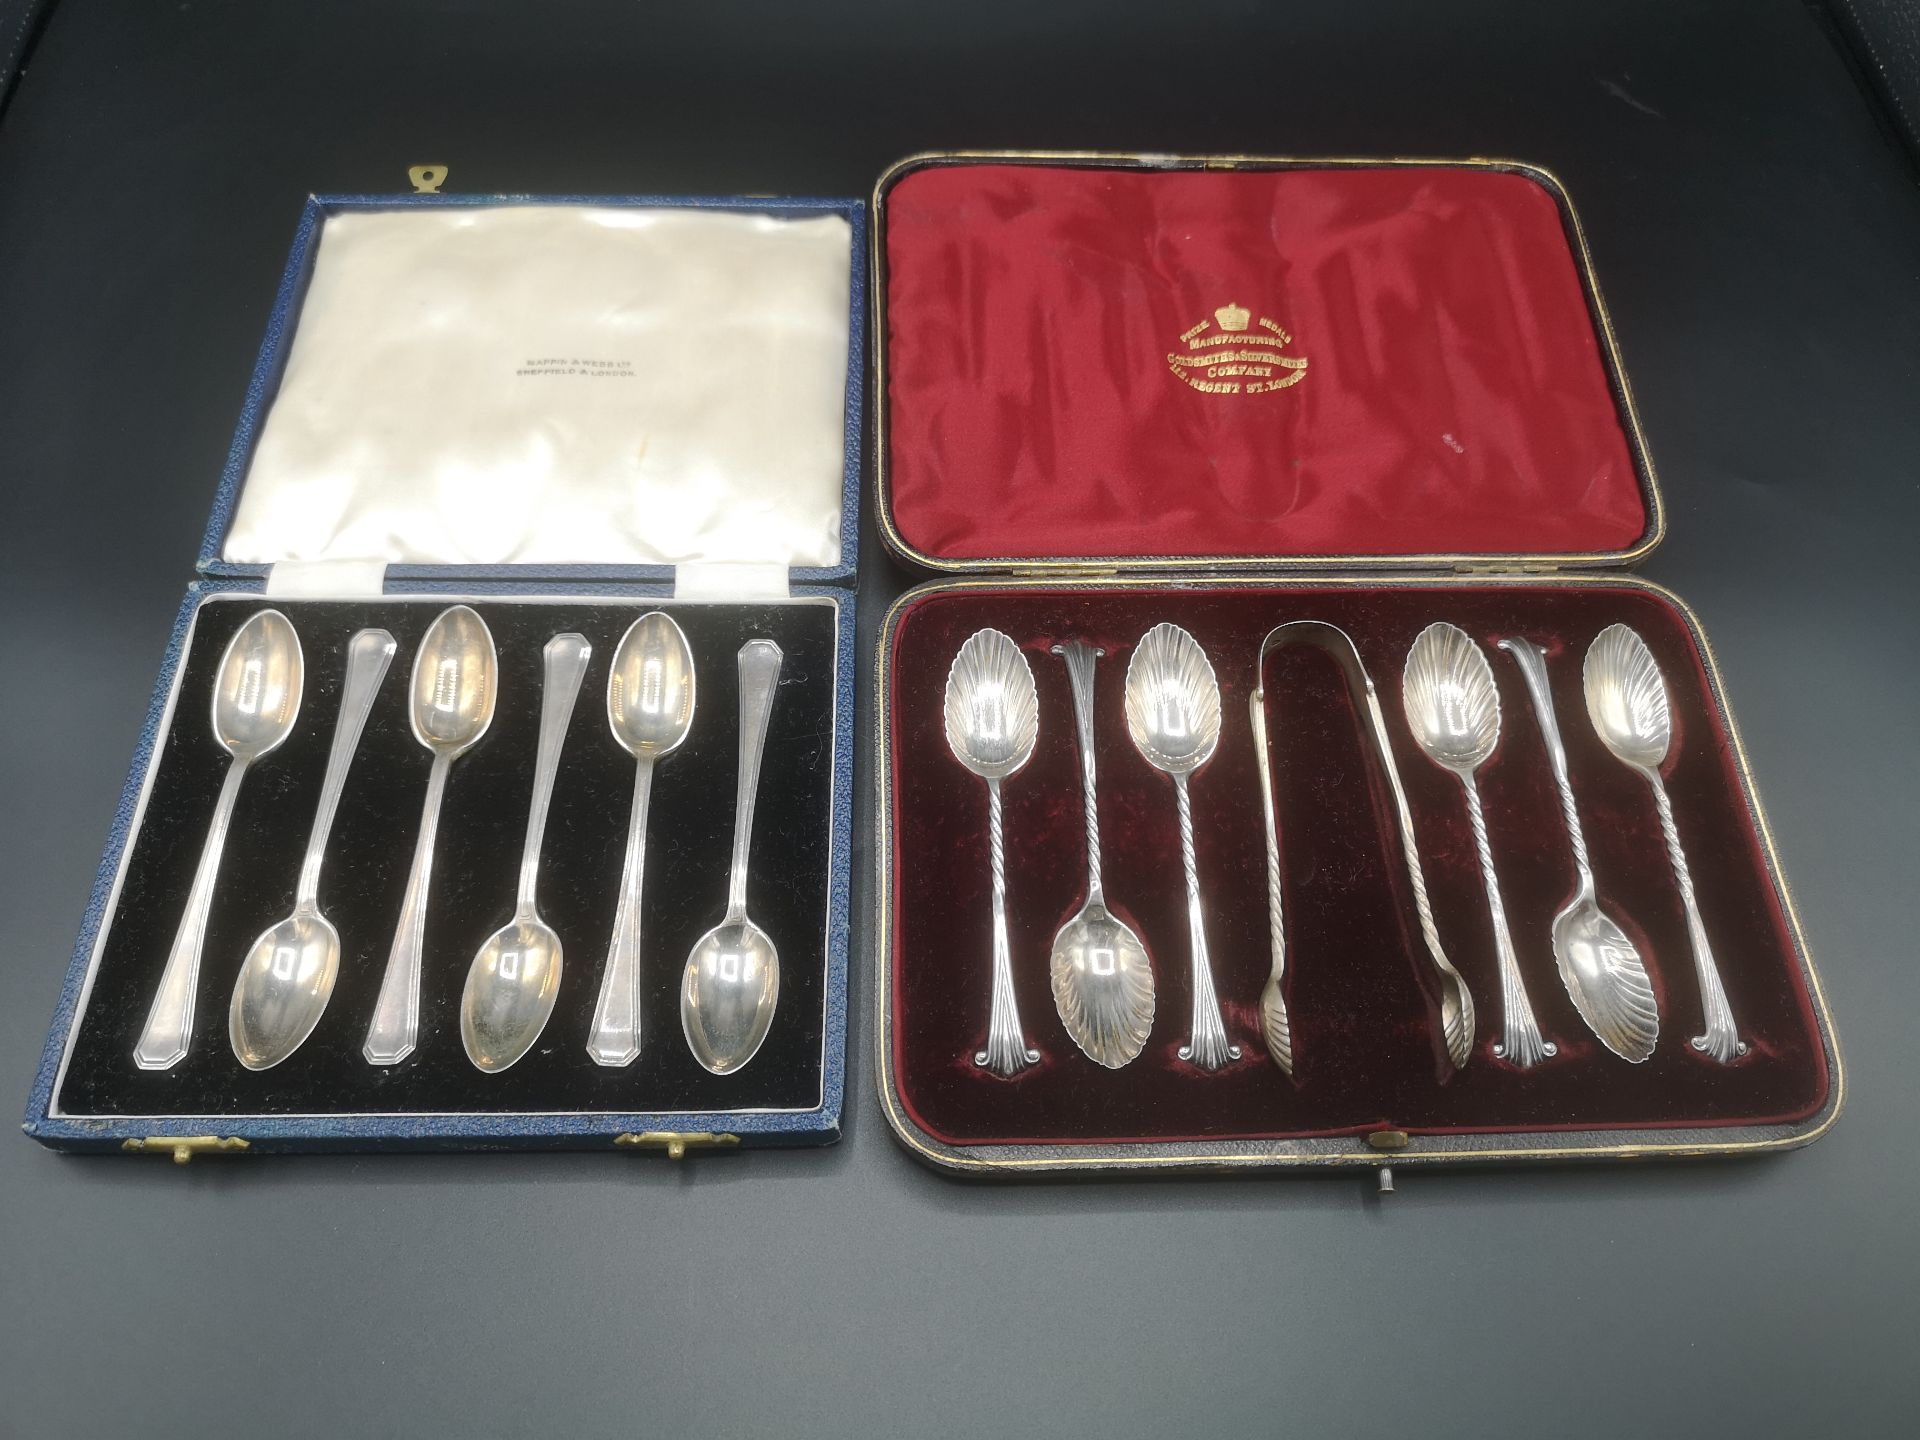 Two sets of silver tea spoons